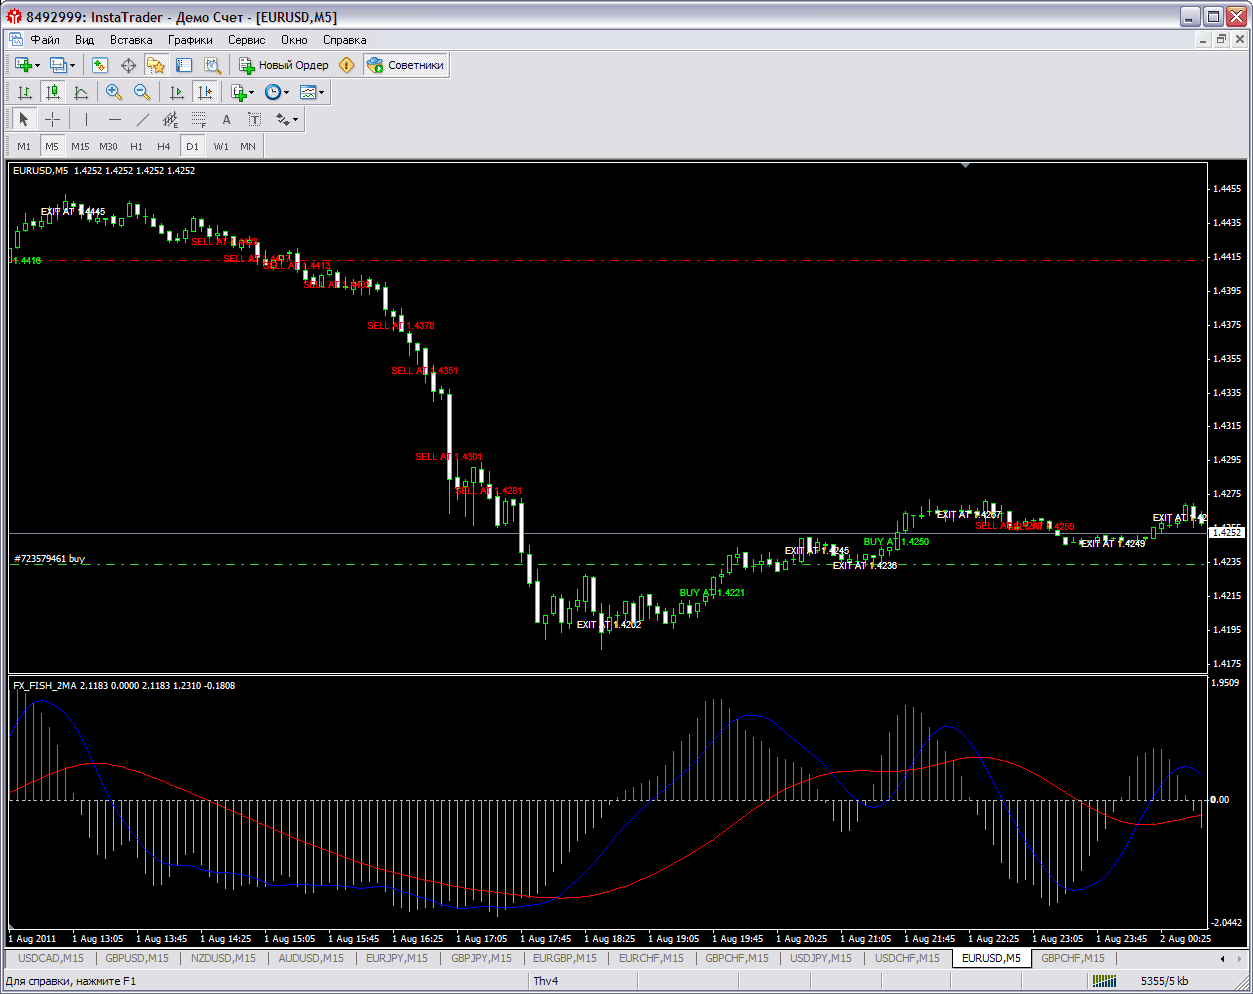 Ts fishing forex 103 12 investment entity